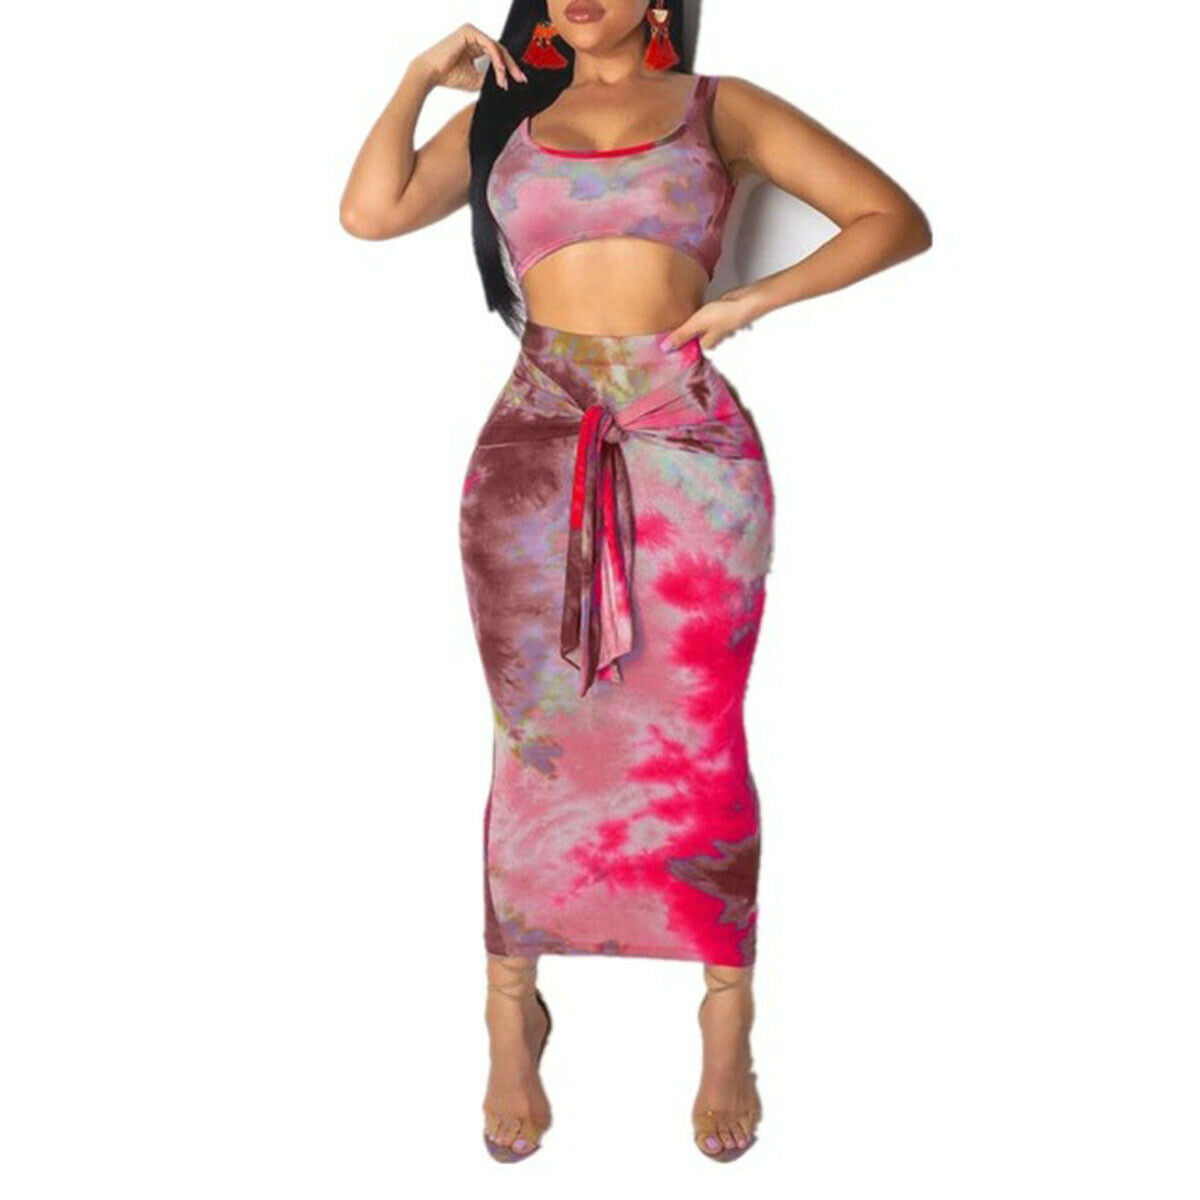 Plus Size Skirt Sets Tie Dye Twp Piece Outfit Sleeveless Tank Crop Top Bodycon Skirts Pink Blue 1X